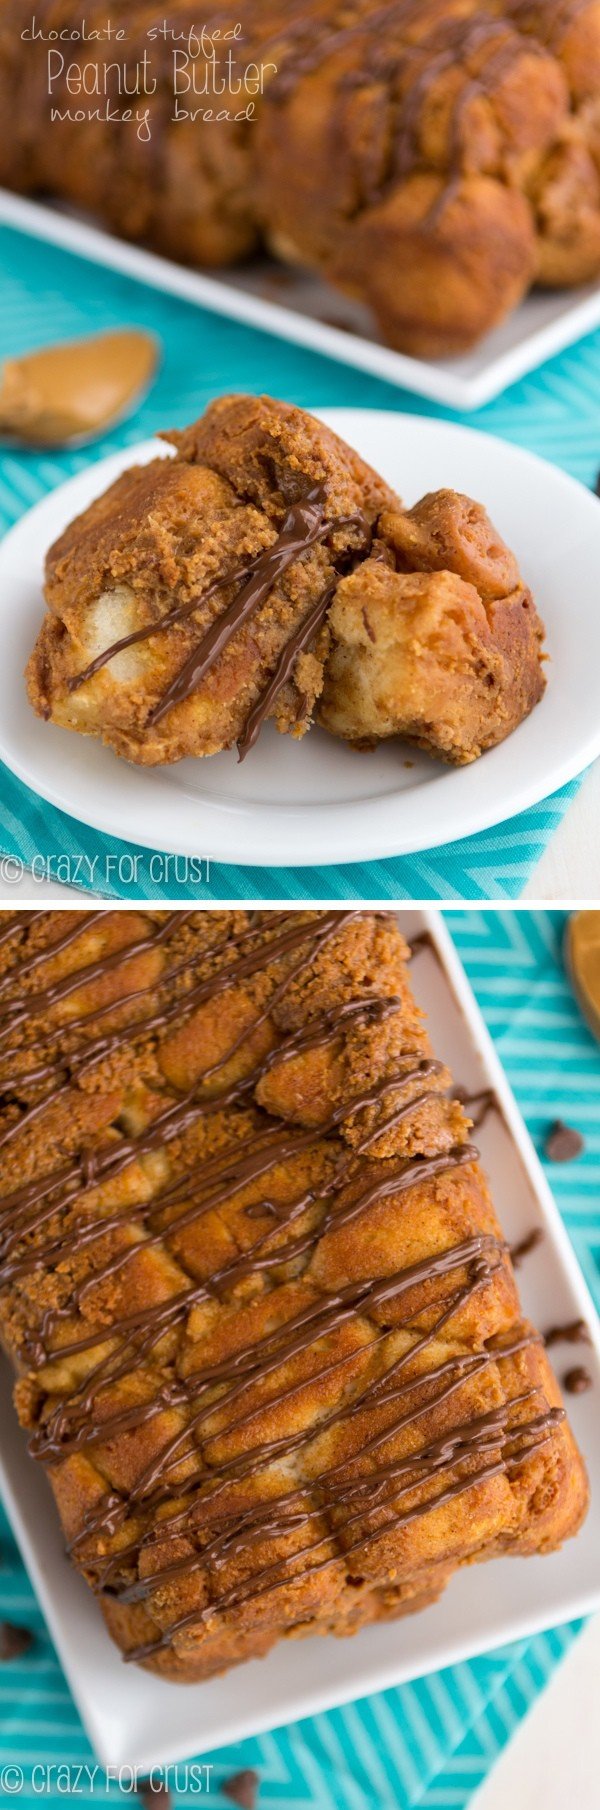 Photo collage of {Chocolate Stuffed} Peanut Butter Monkey Bread Loaf showing it as a full loaf and also on a white plate